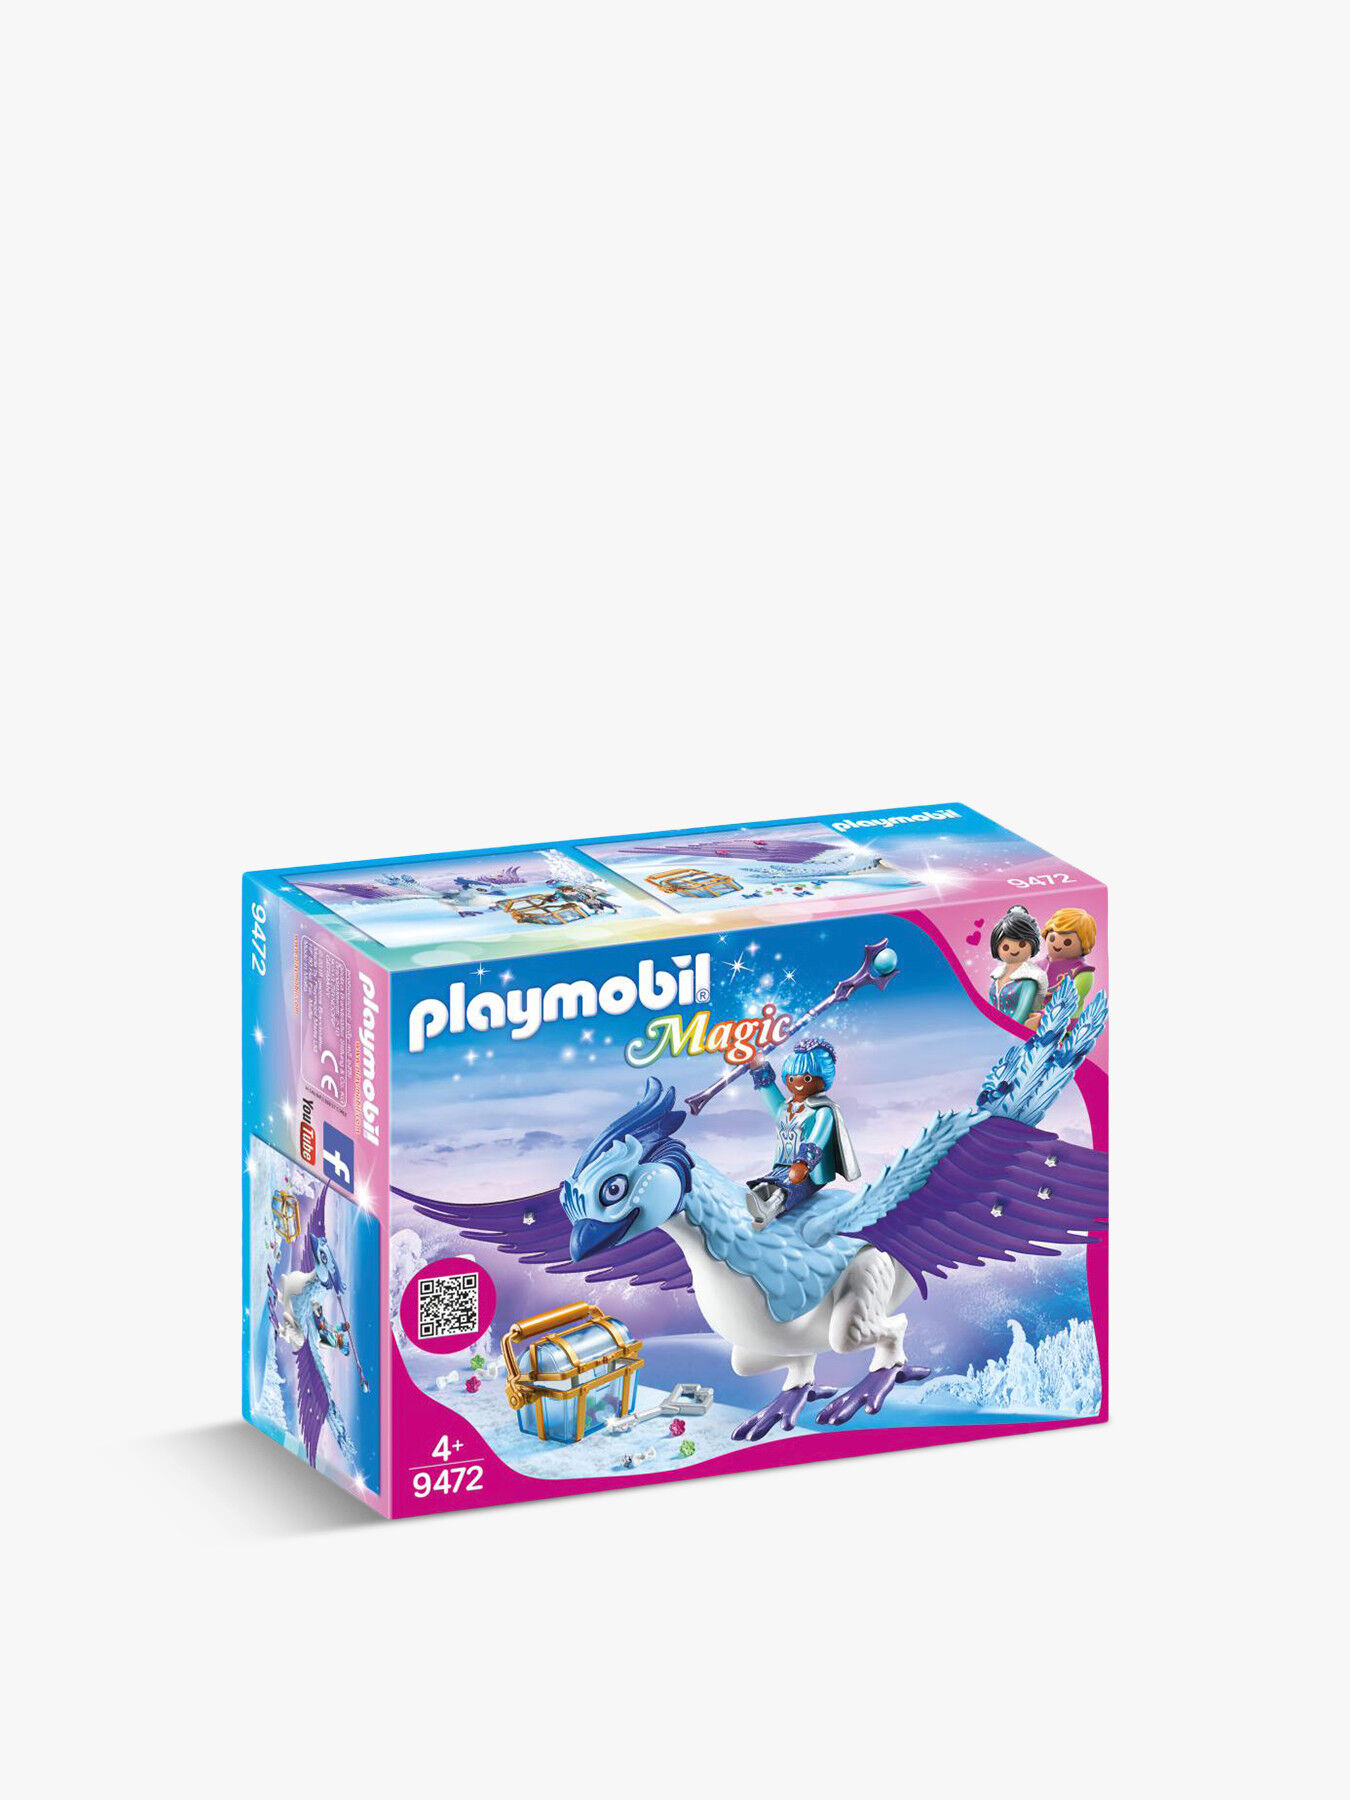 playmobil magic - Online Discount Shop for Electronics, Apparel, Toys,  Books, Games, Computers, Shoes, Jewelry, Watches, Baby Products, Sports &  Outdoors, Office Products, Bed & Bath, Furniture, Tools, Hardware,  Automotive Parts, Accessories